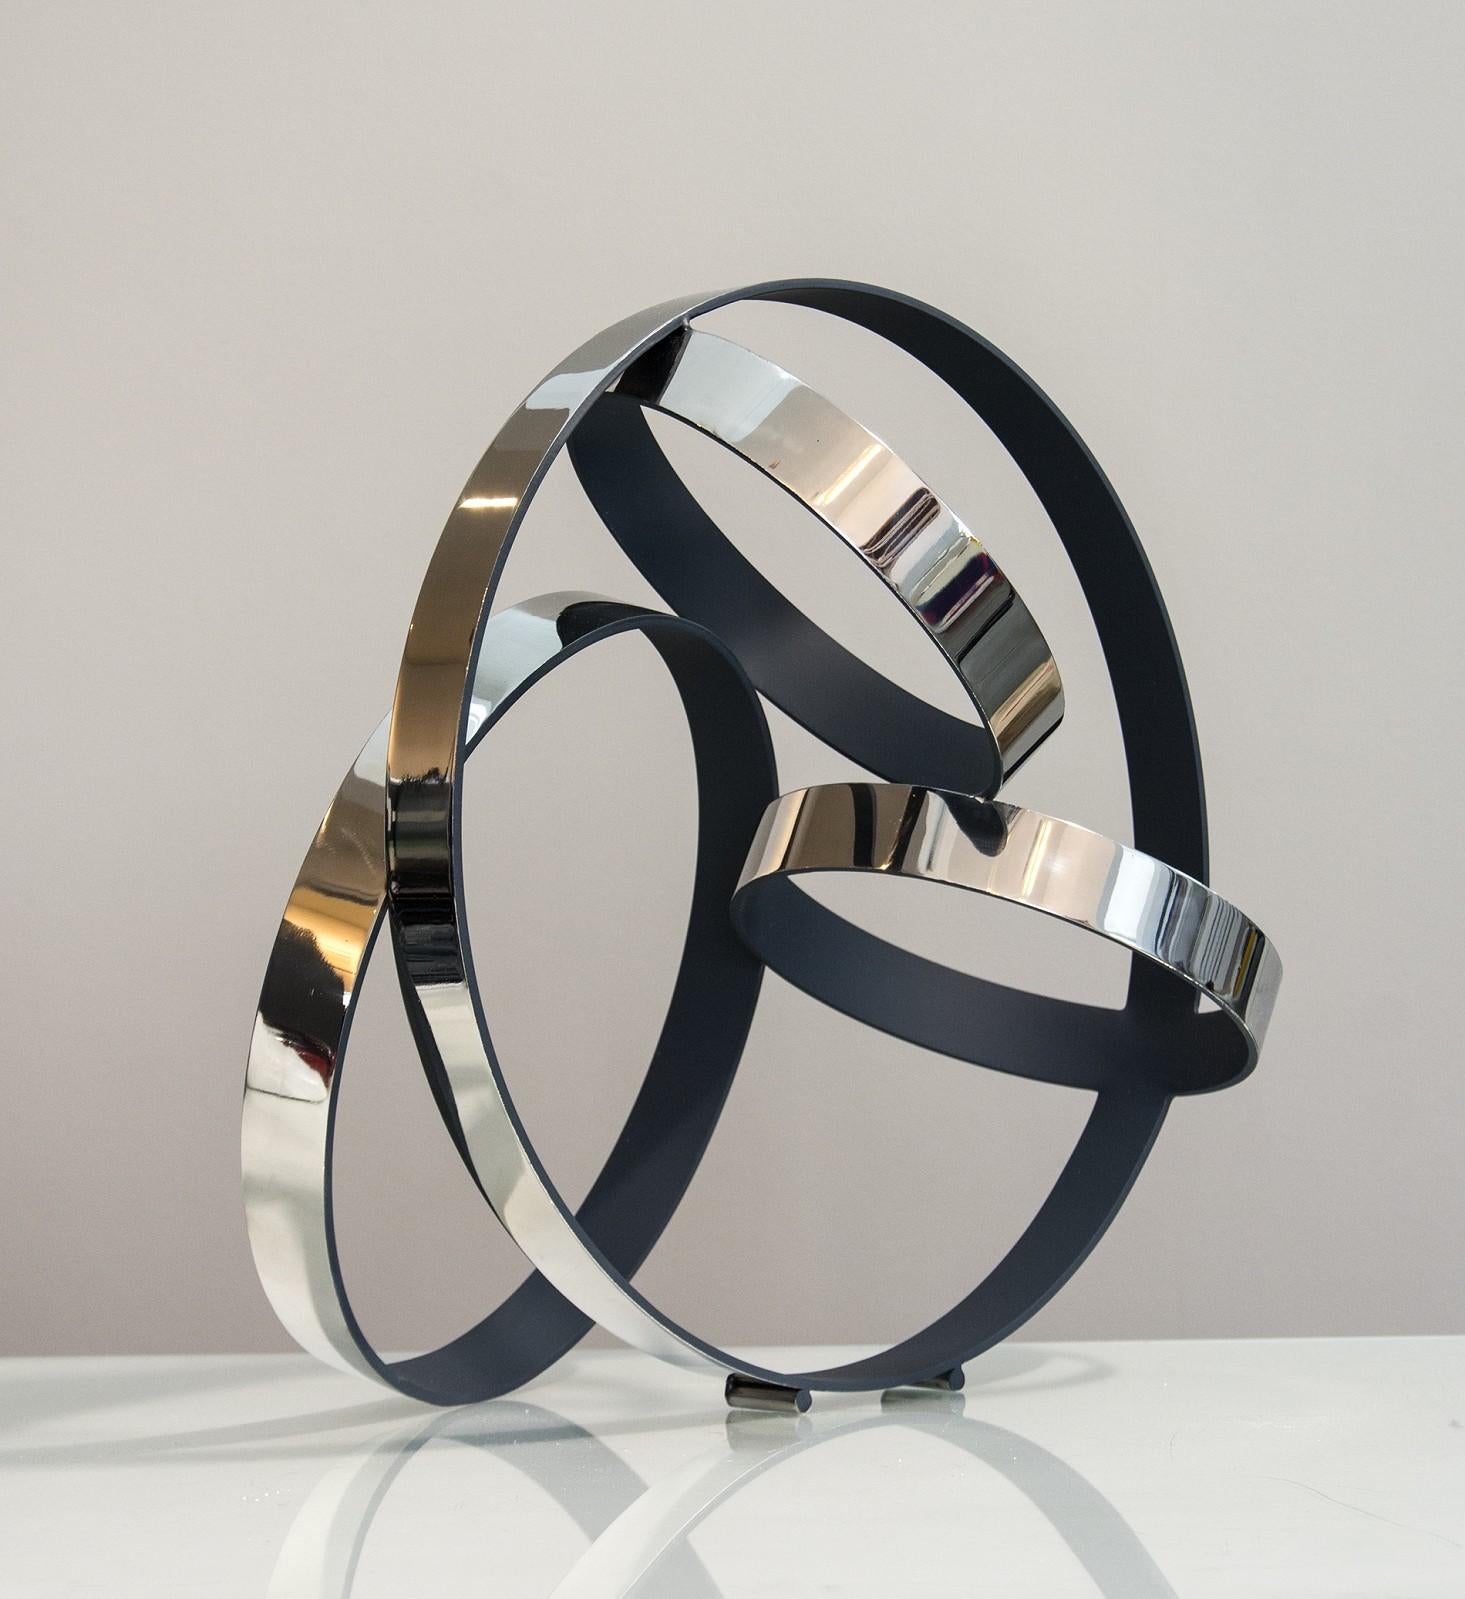 Four Ring Temps Zero Blue Poseidon 4/10 - Steel rings with blue interior - Contemporary Sculpture by Philippe Pallafray